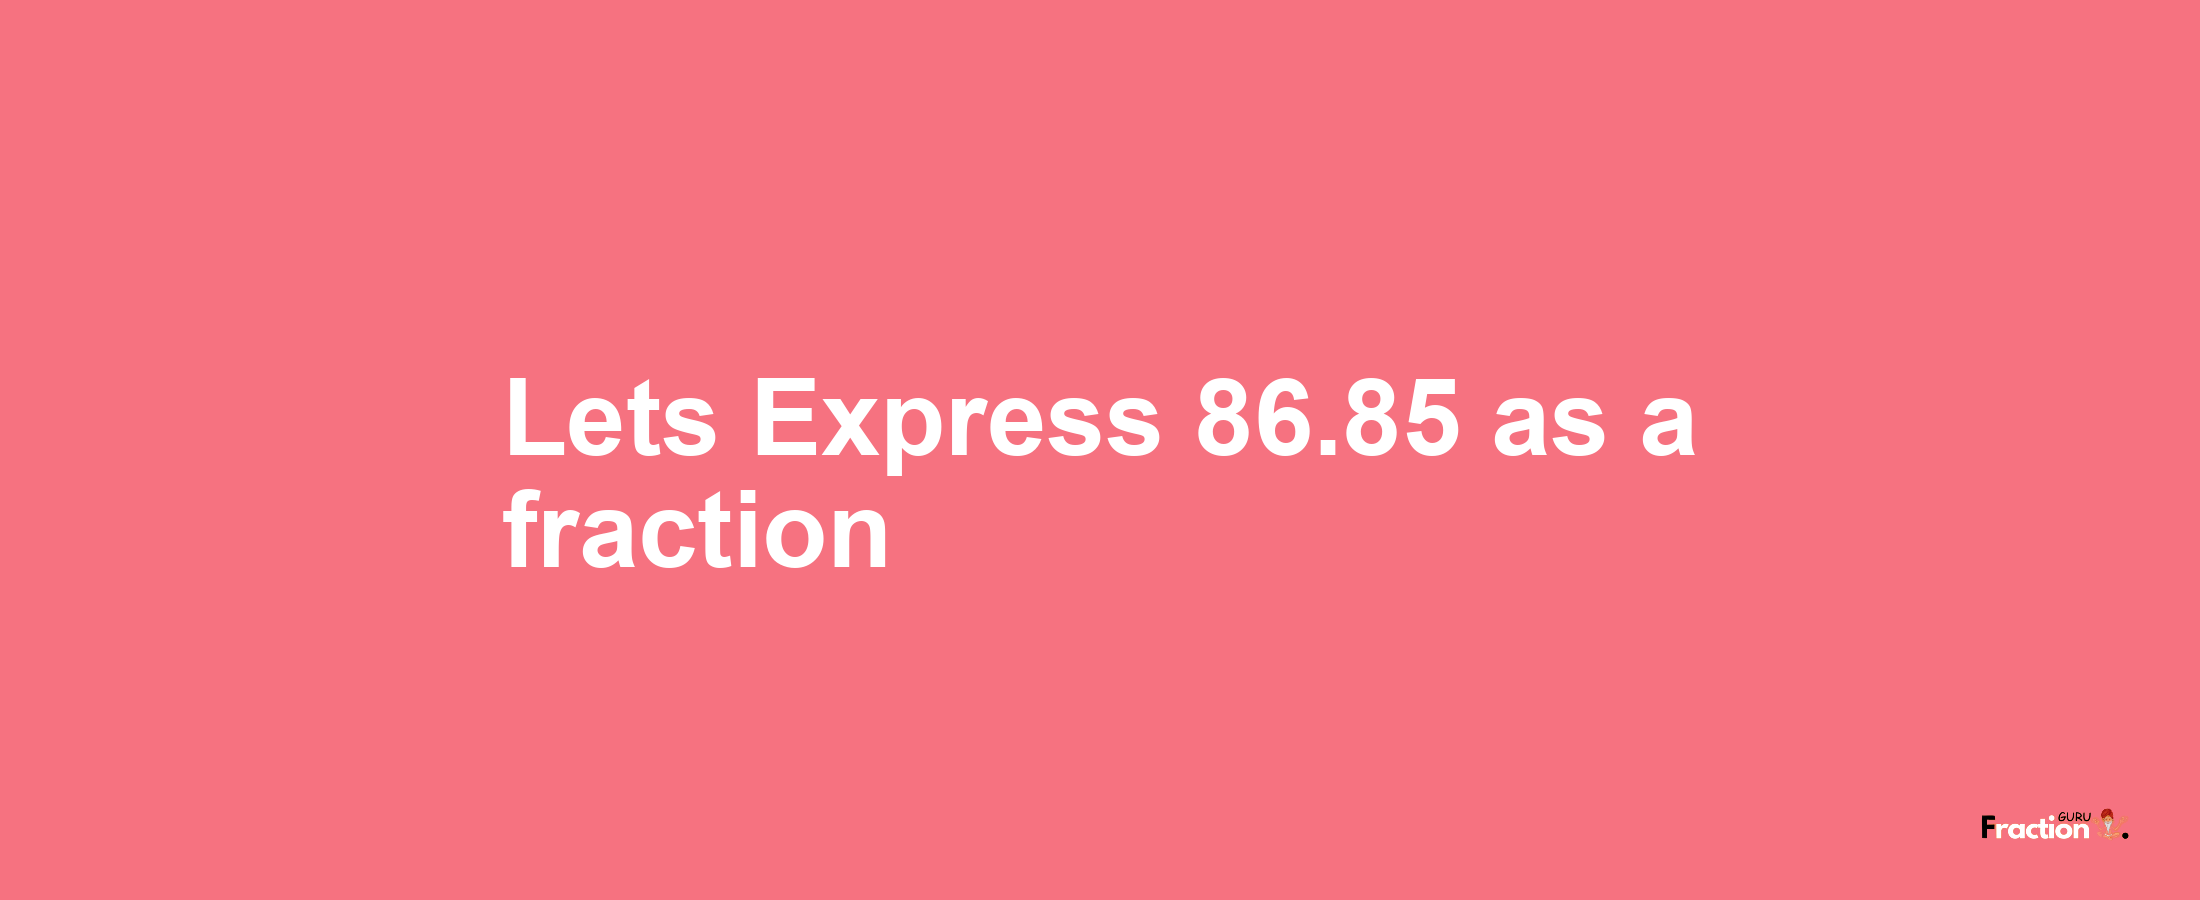 Lets Express 86.85 as afraction